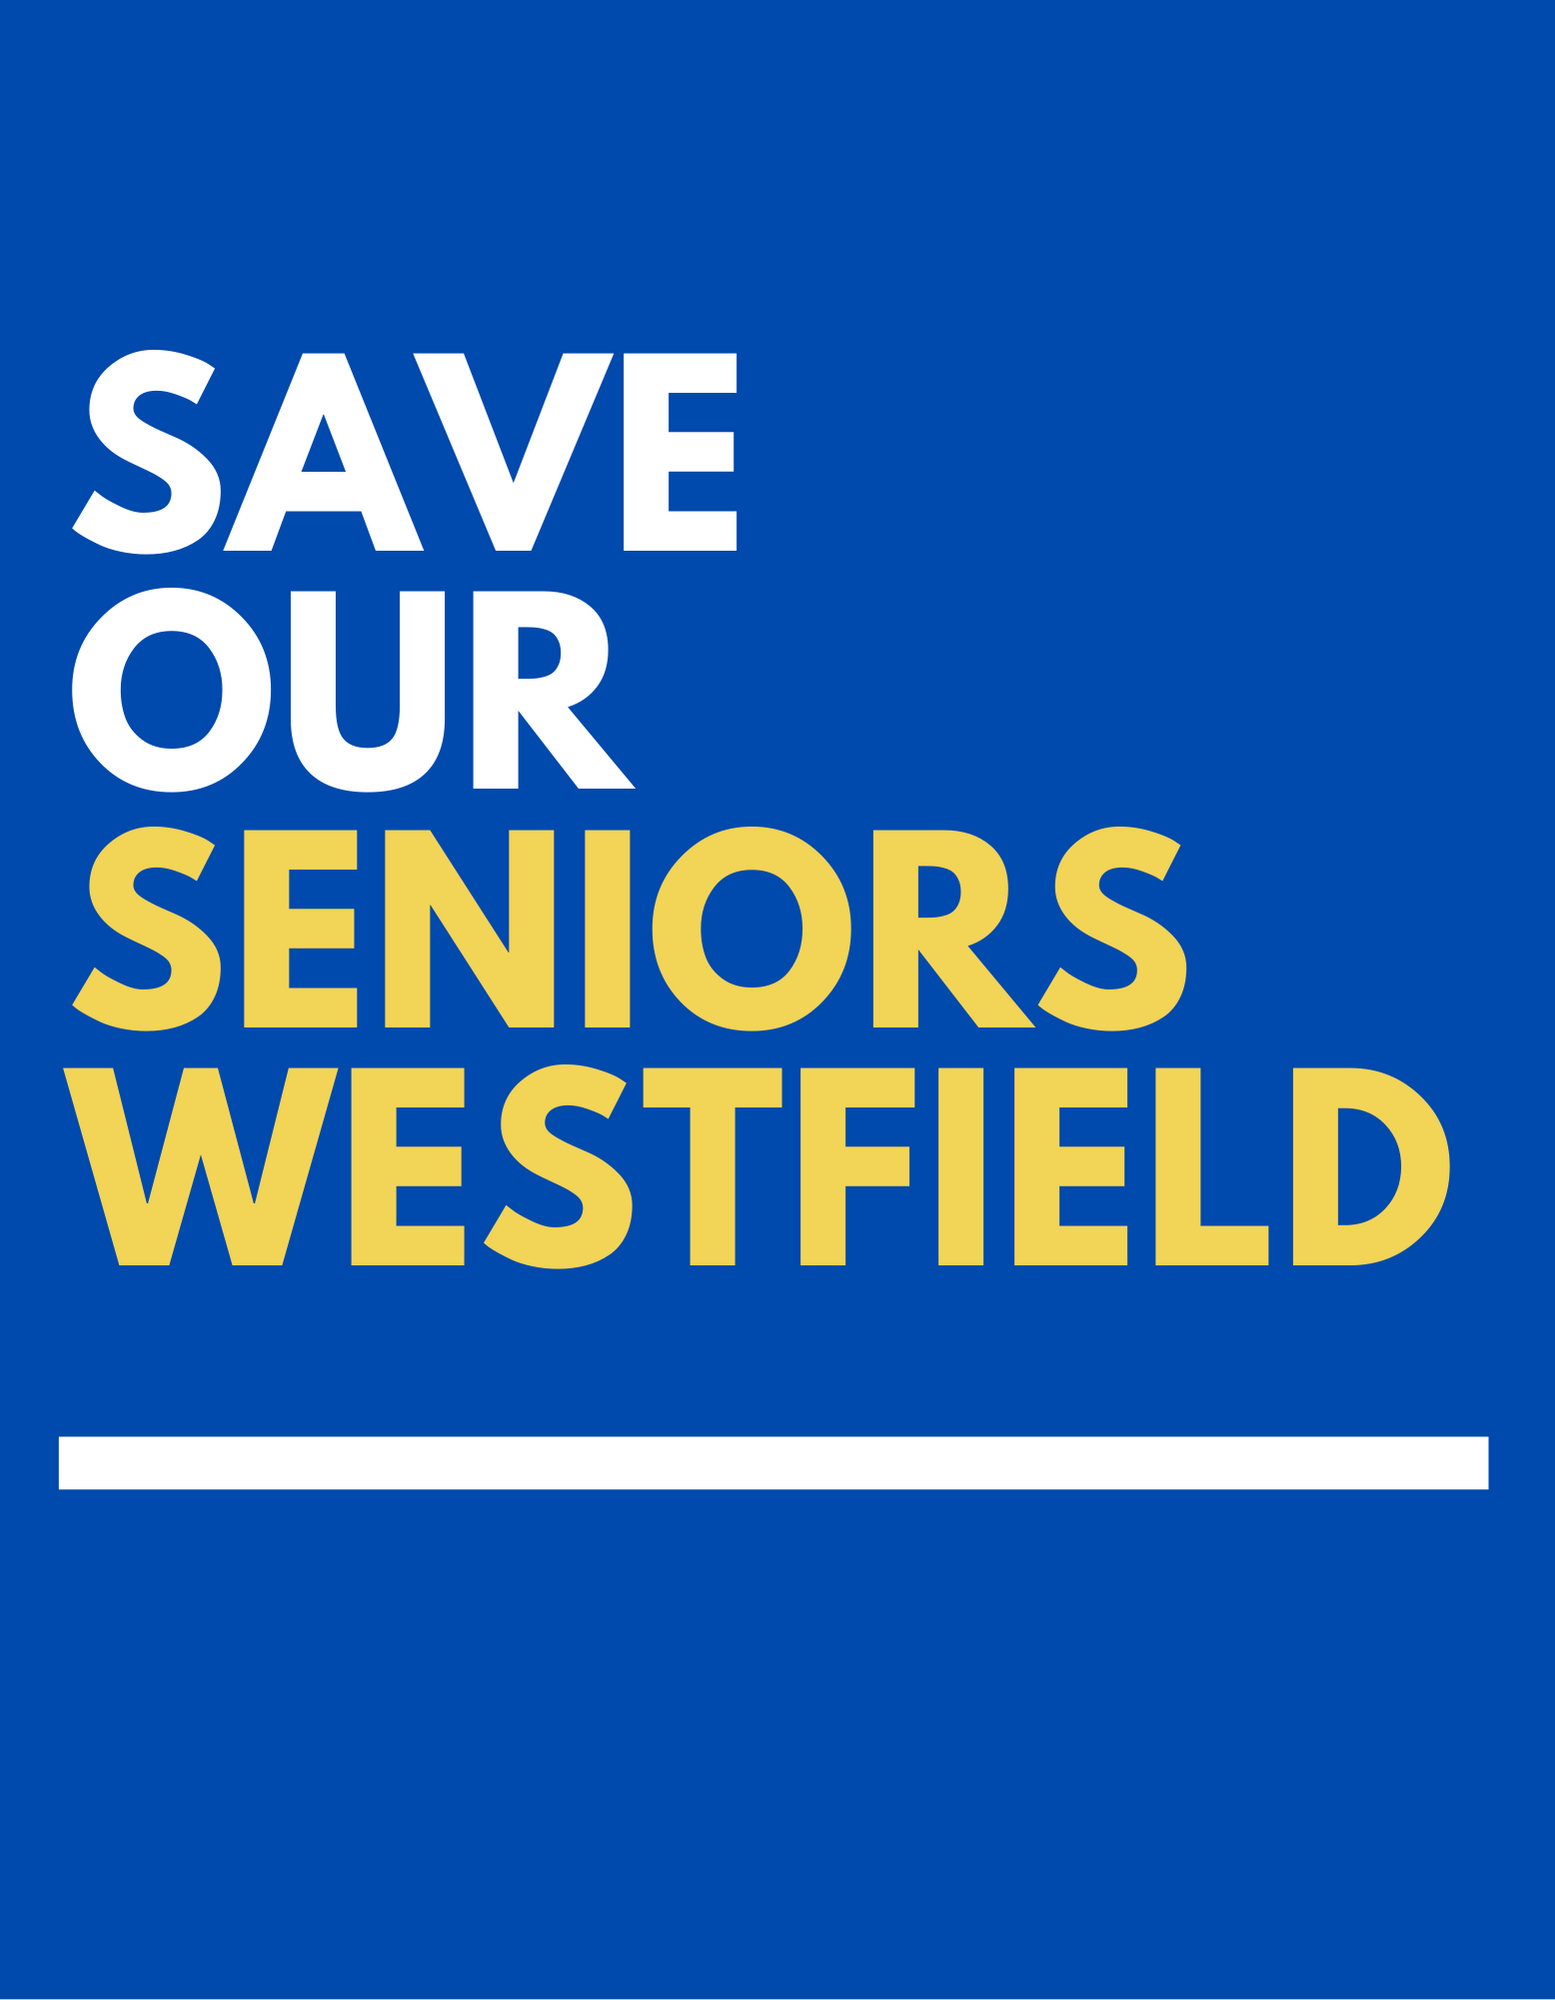 Save Our Seniors Westfield is grateful to all our volunteers for their efforts! Because of YOU the Mayor and Town Council have agreed explicitly NOT to replace Westfield Senior with luxury condos. An important first step but there is still much more to be done.